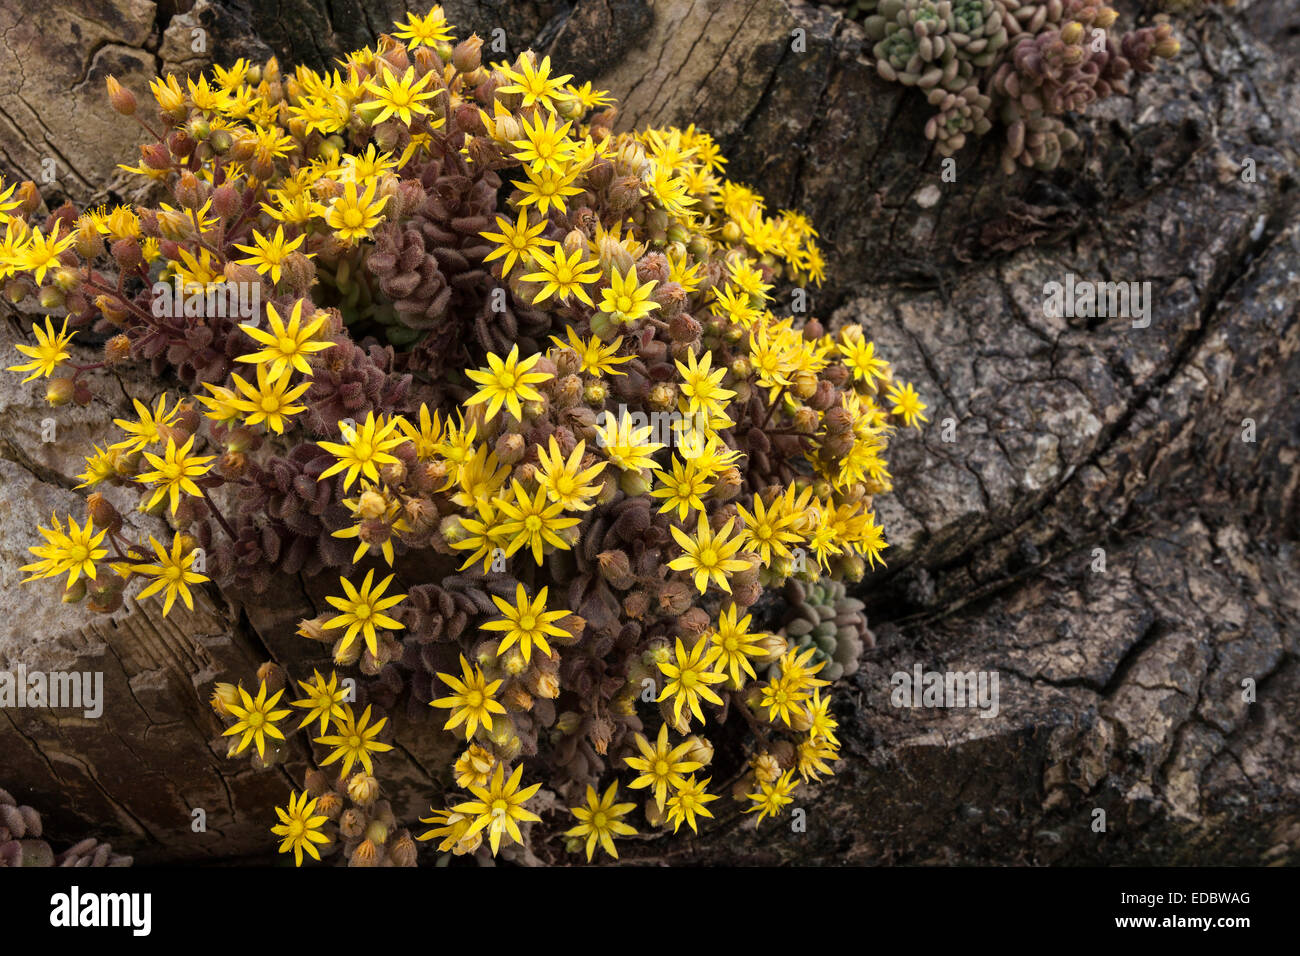 Monanthes plants of the Crassulaceae family (Monanthes), yellow flowers, Lanzarote, Canary Islands, Spain Stock Photo